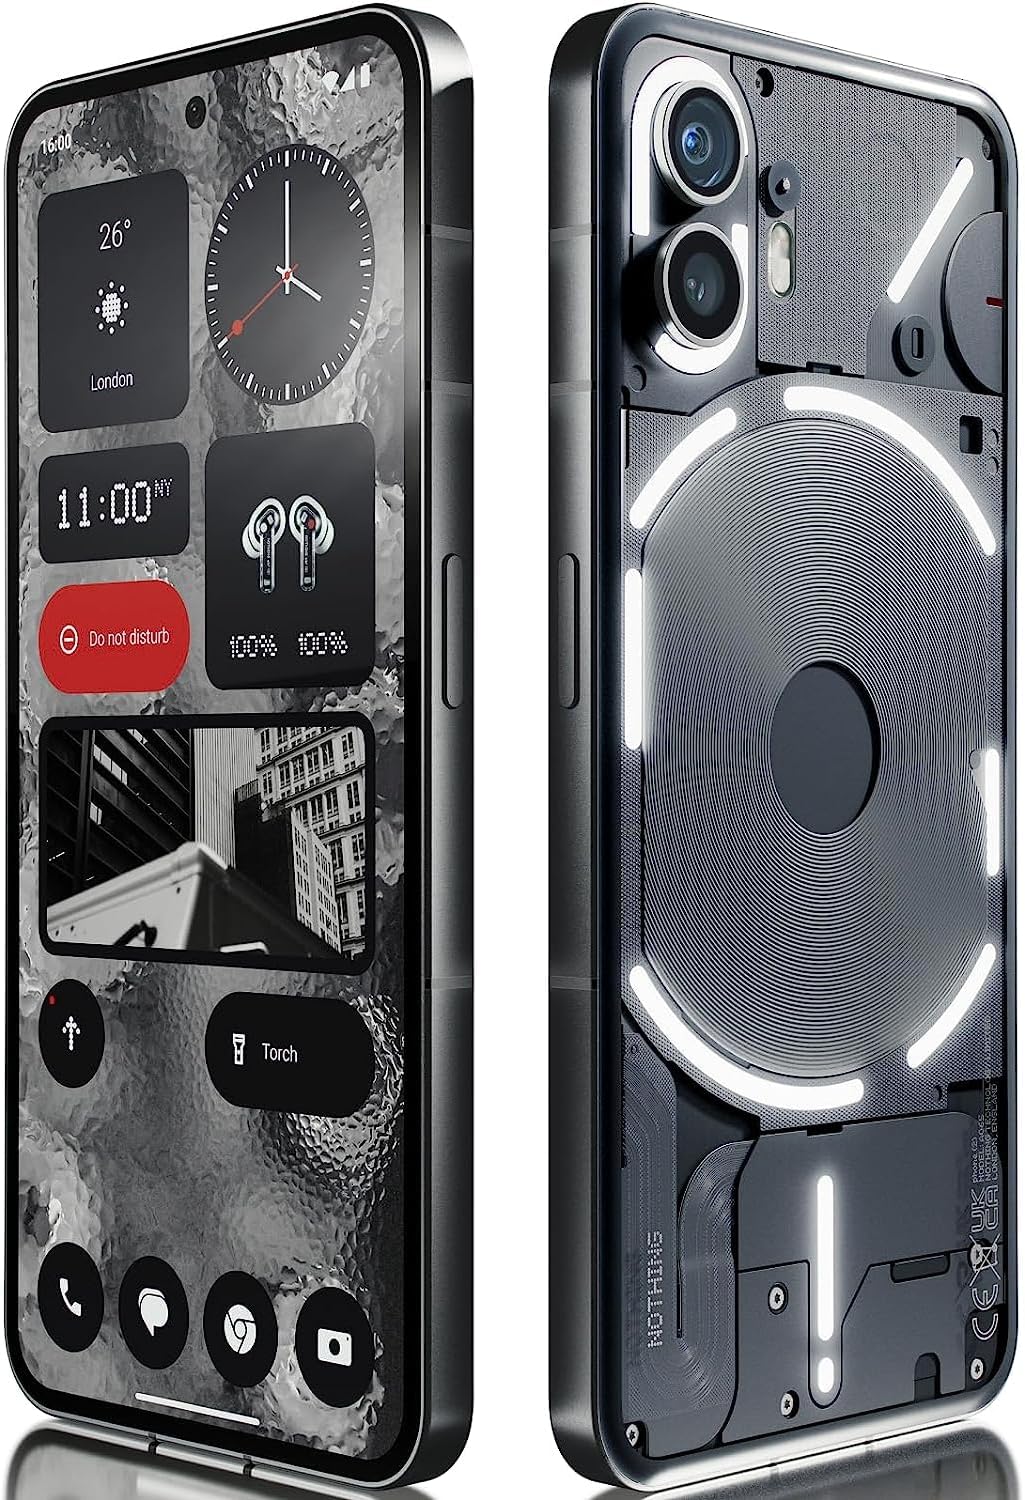 The image shows the nothing phone 2 encased in a transparent protective case, which allows visibility of the smartphone's internal aesthetic design or a design mimicking it. On one side of the image, you can see the screen of the phone displaying a user interface with various widgets and icons including a clock, weather information for London, wireless earbuds battery life.